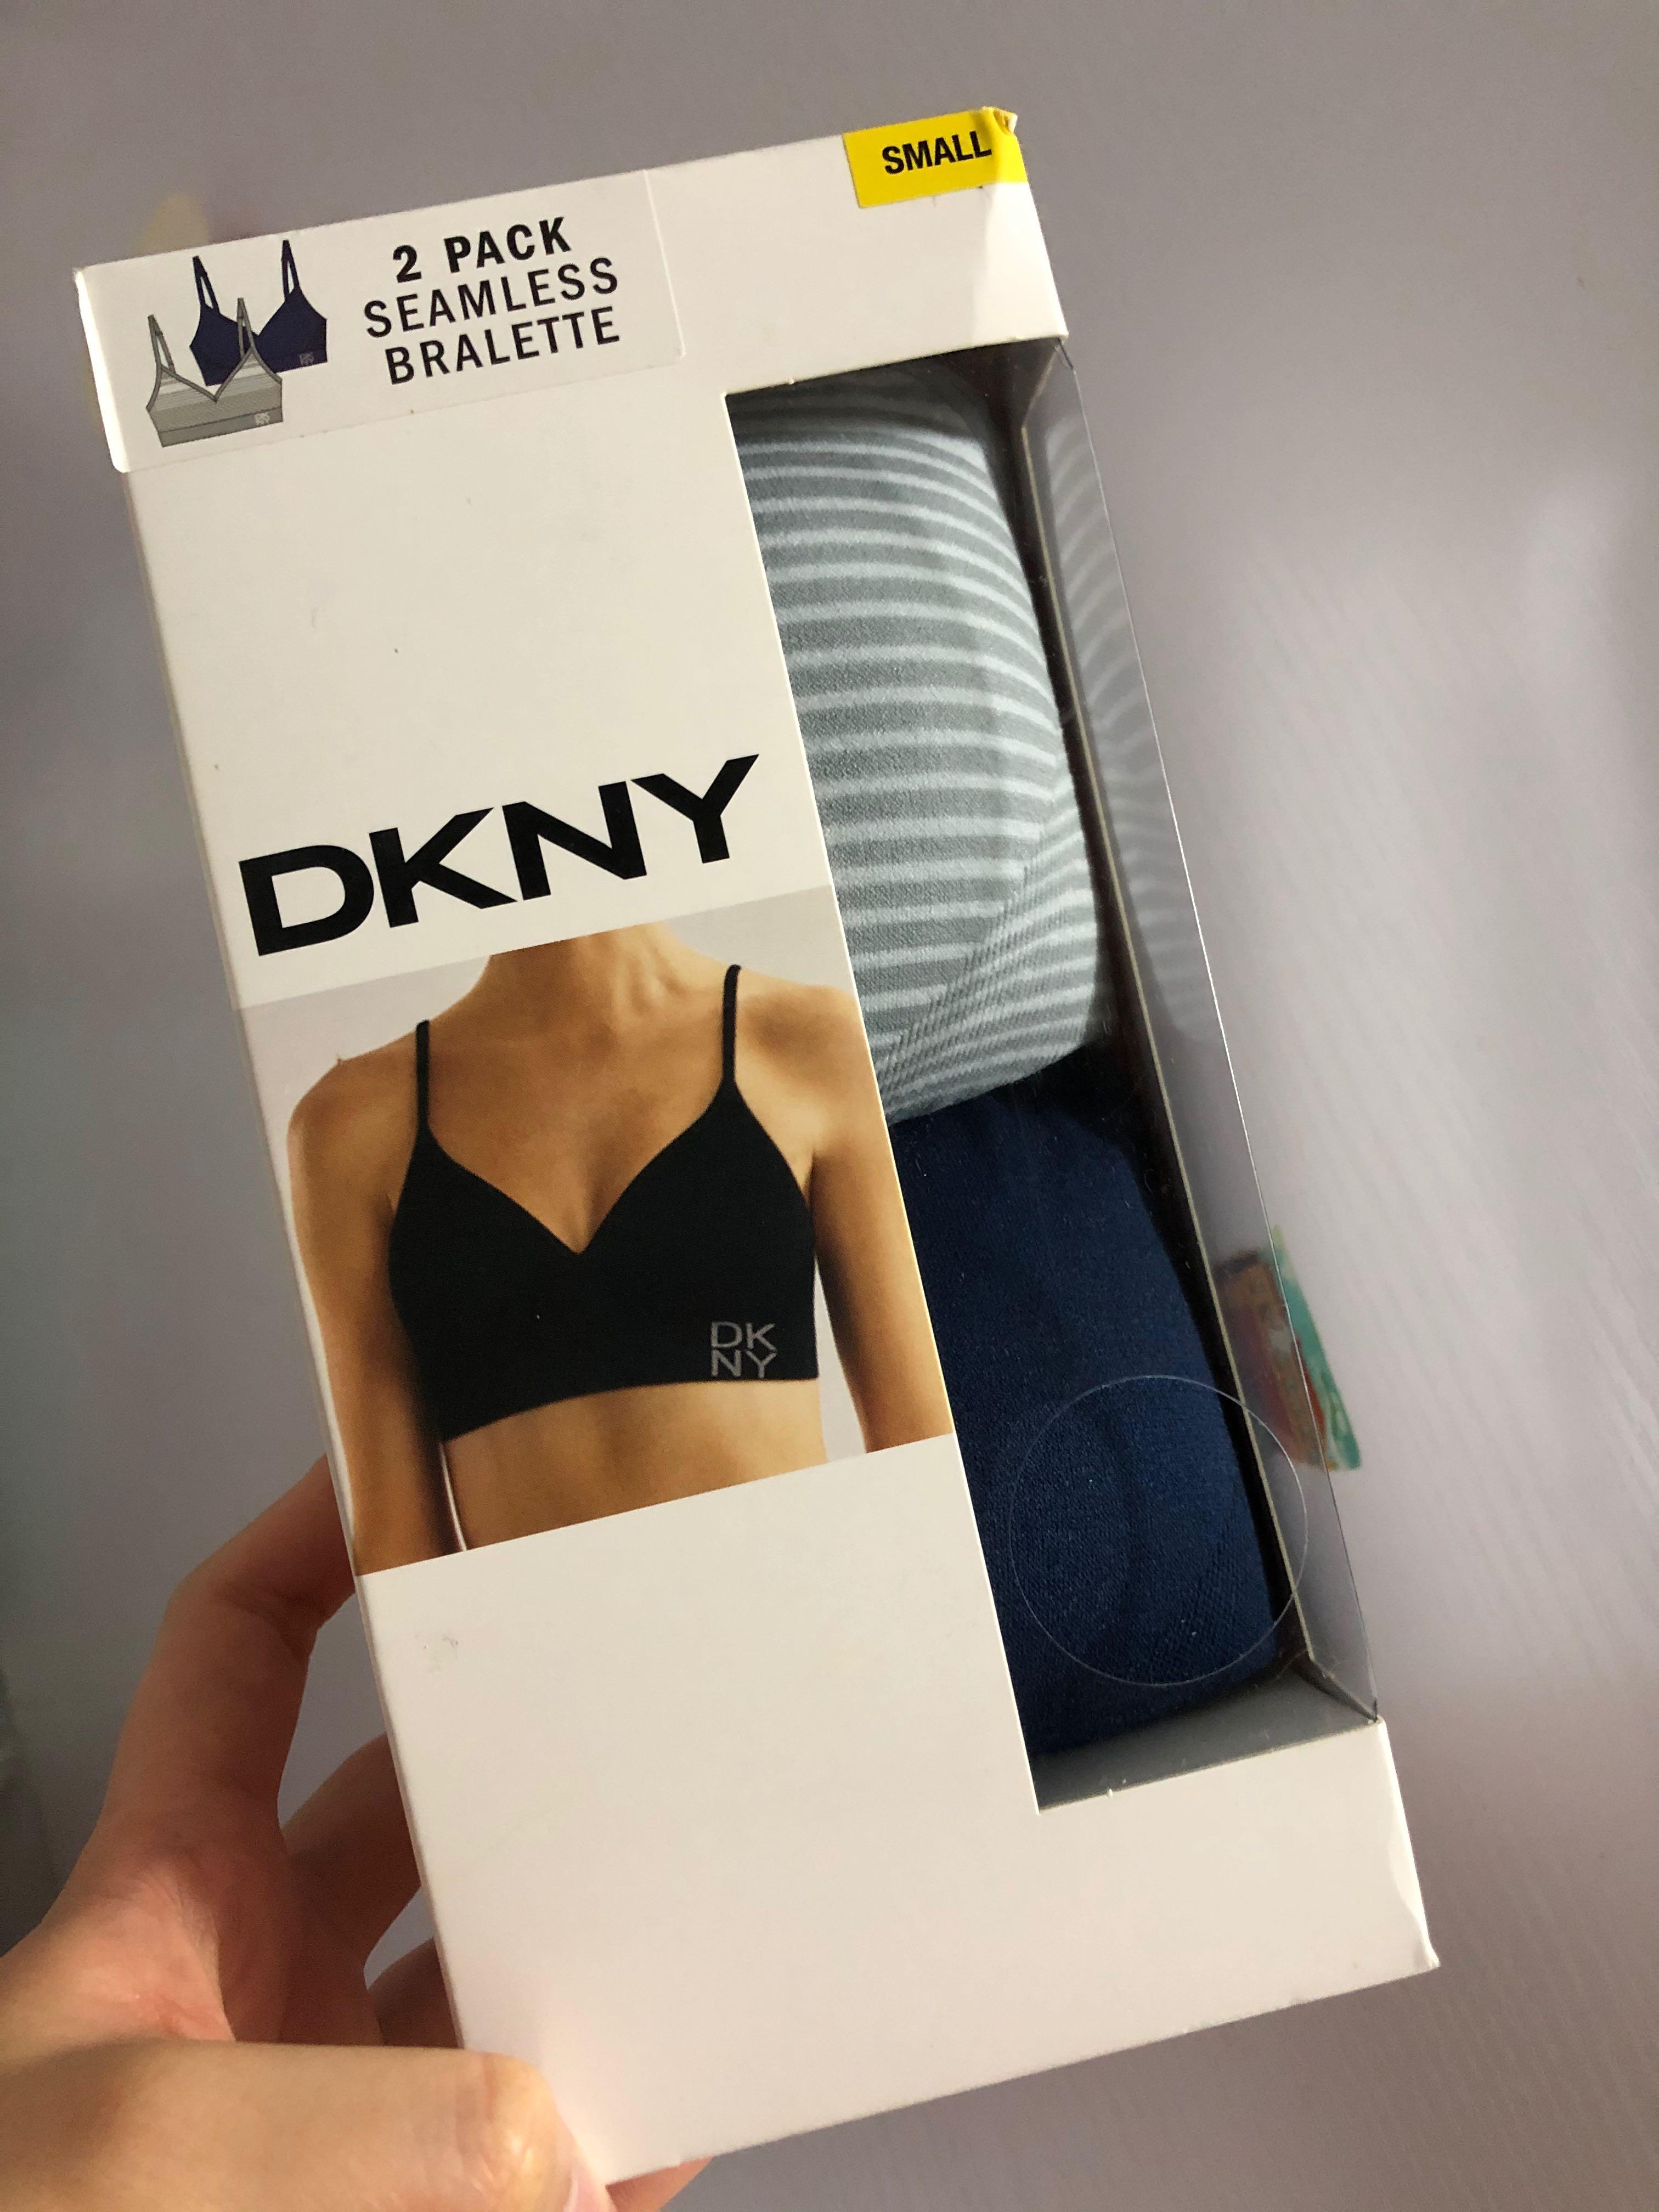 DKNY Seamless Bralette (Small)- 2 Pack *New Sealed In Box* for